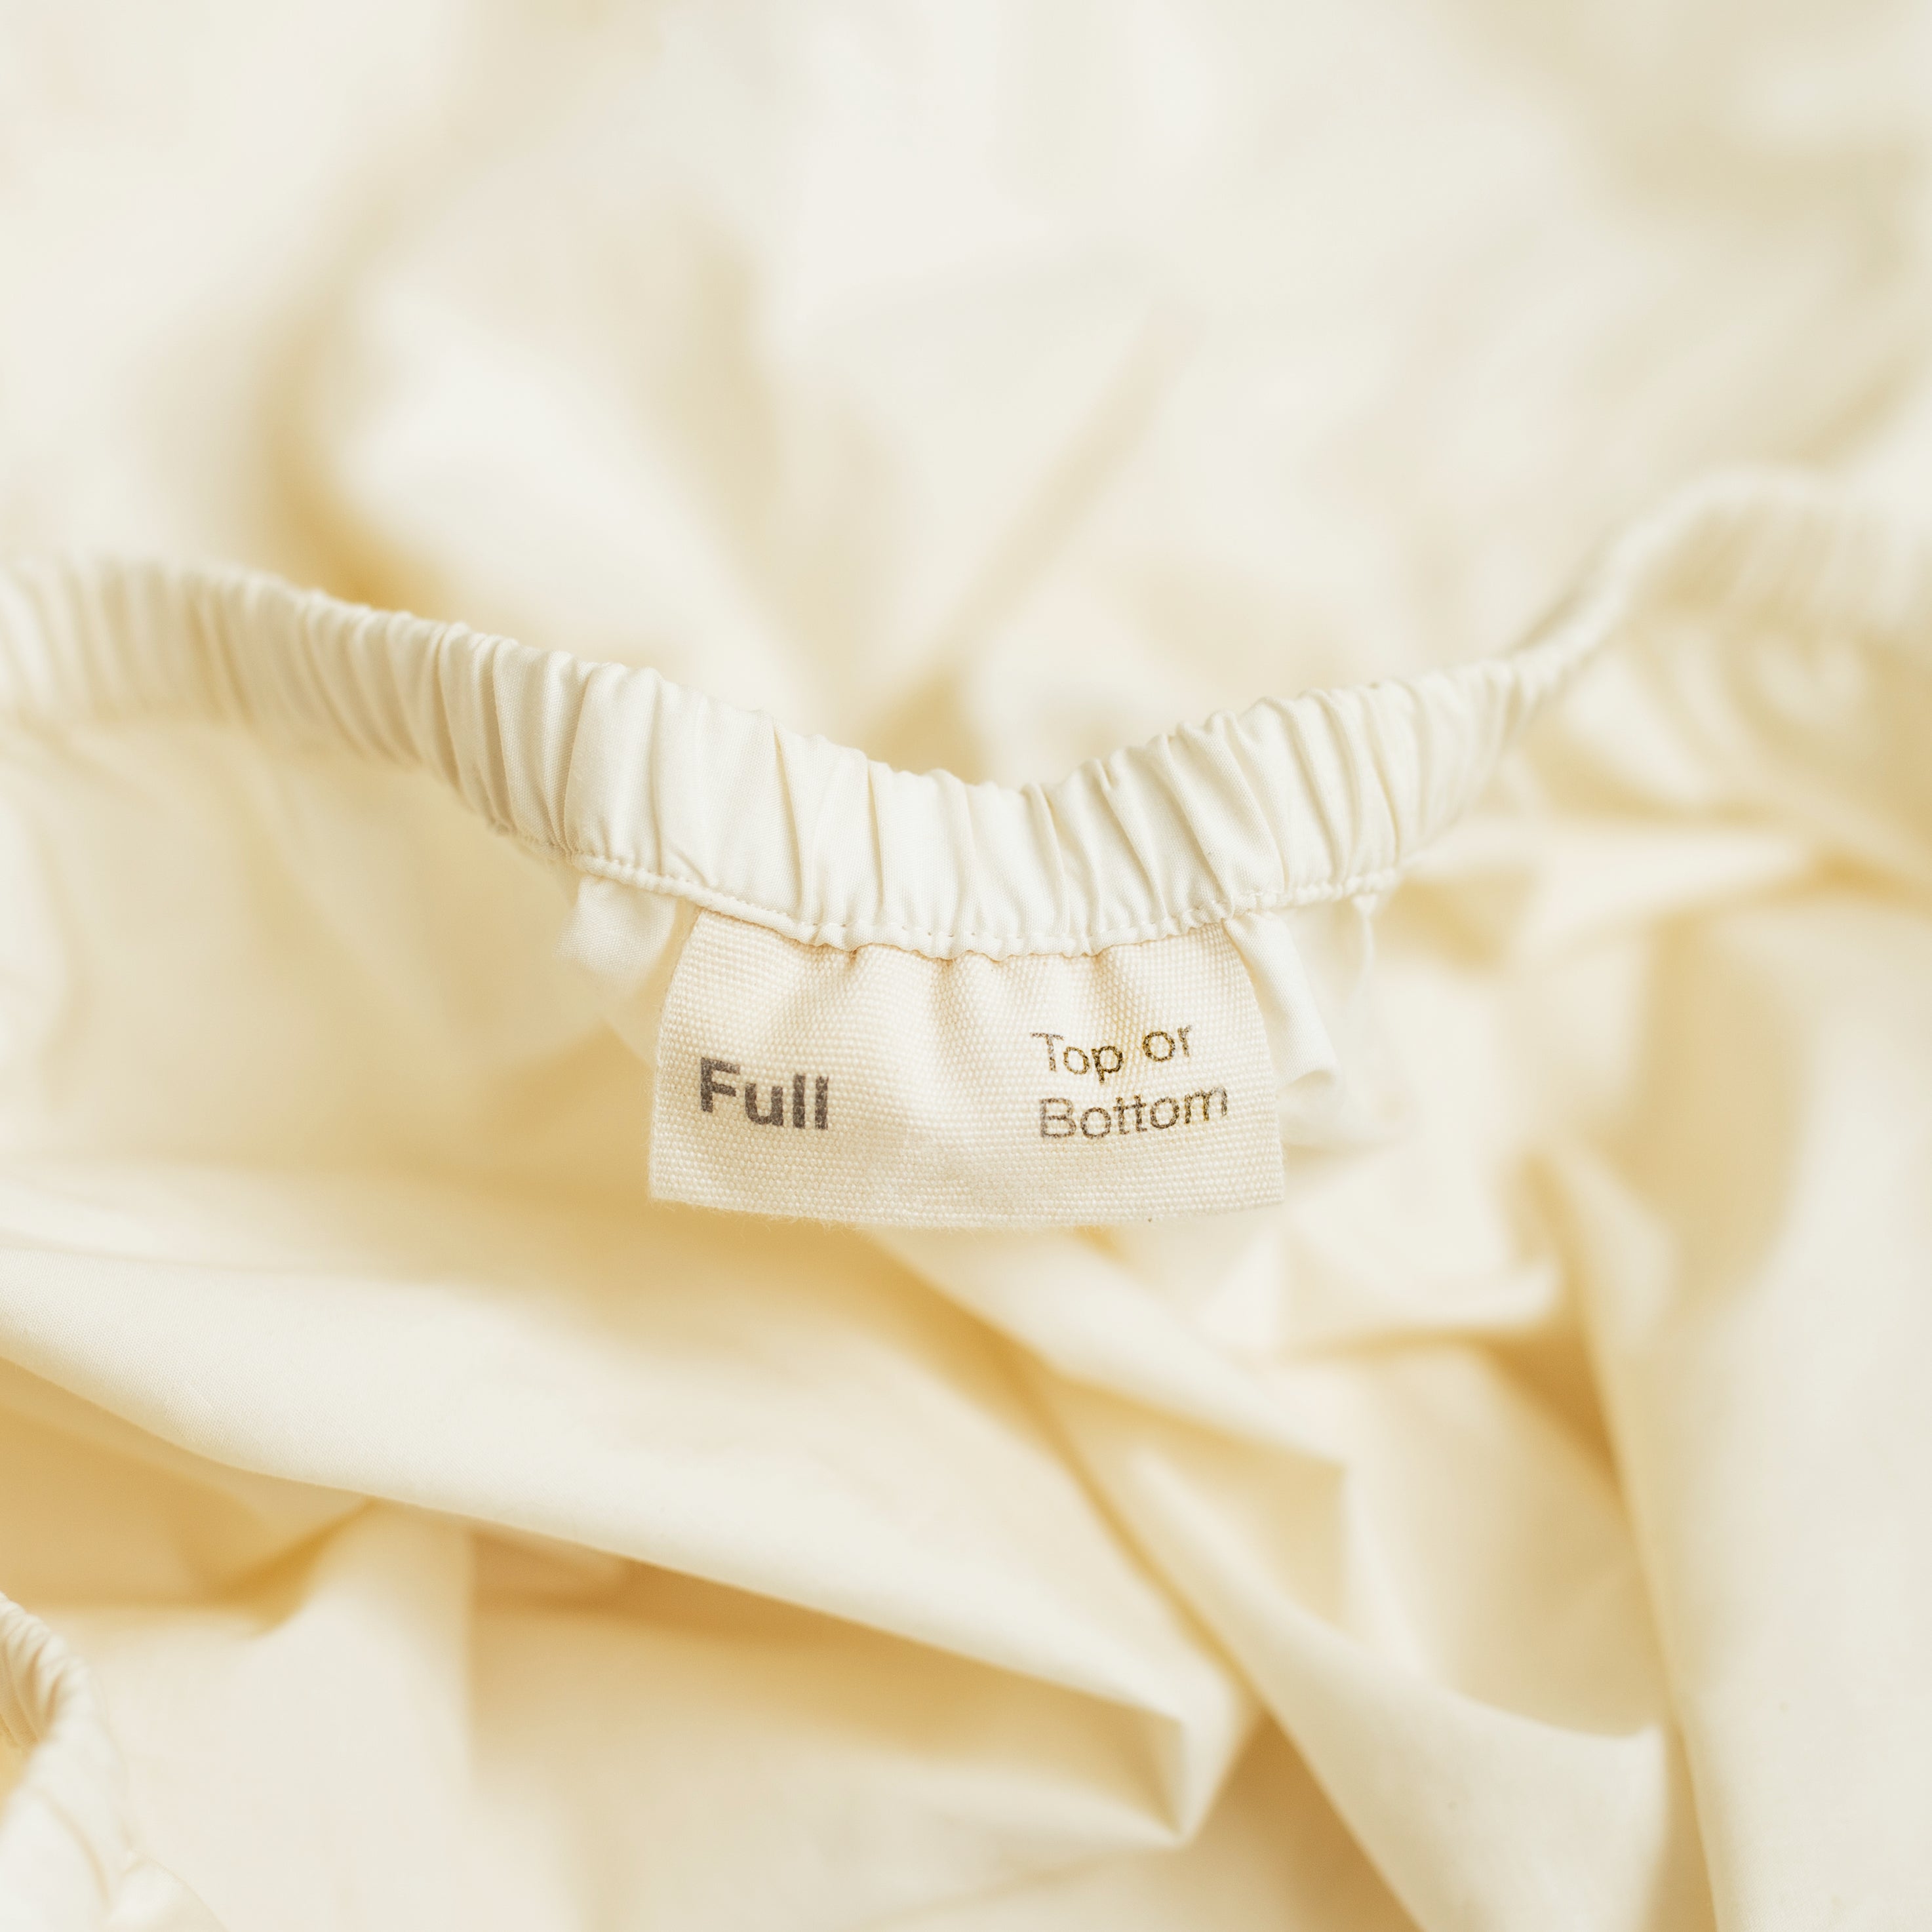 A detail view of the orientation label on an Oolie Deep Fitted Sheet, indicated &quot;Full&quot; size and marking the &quot;Top or Bottom&quot; of the sheet.